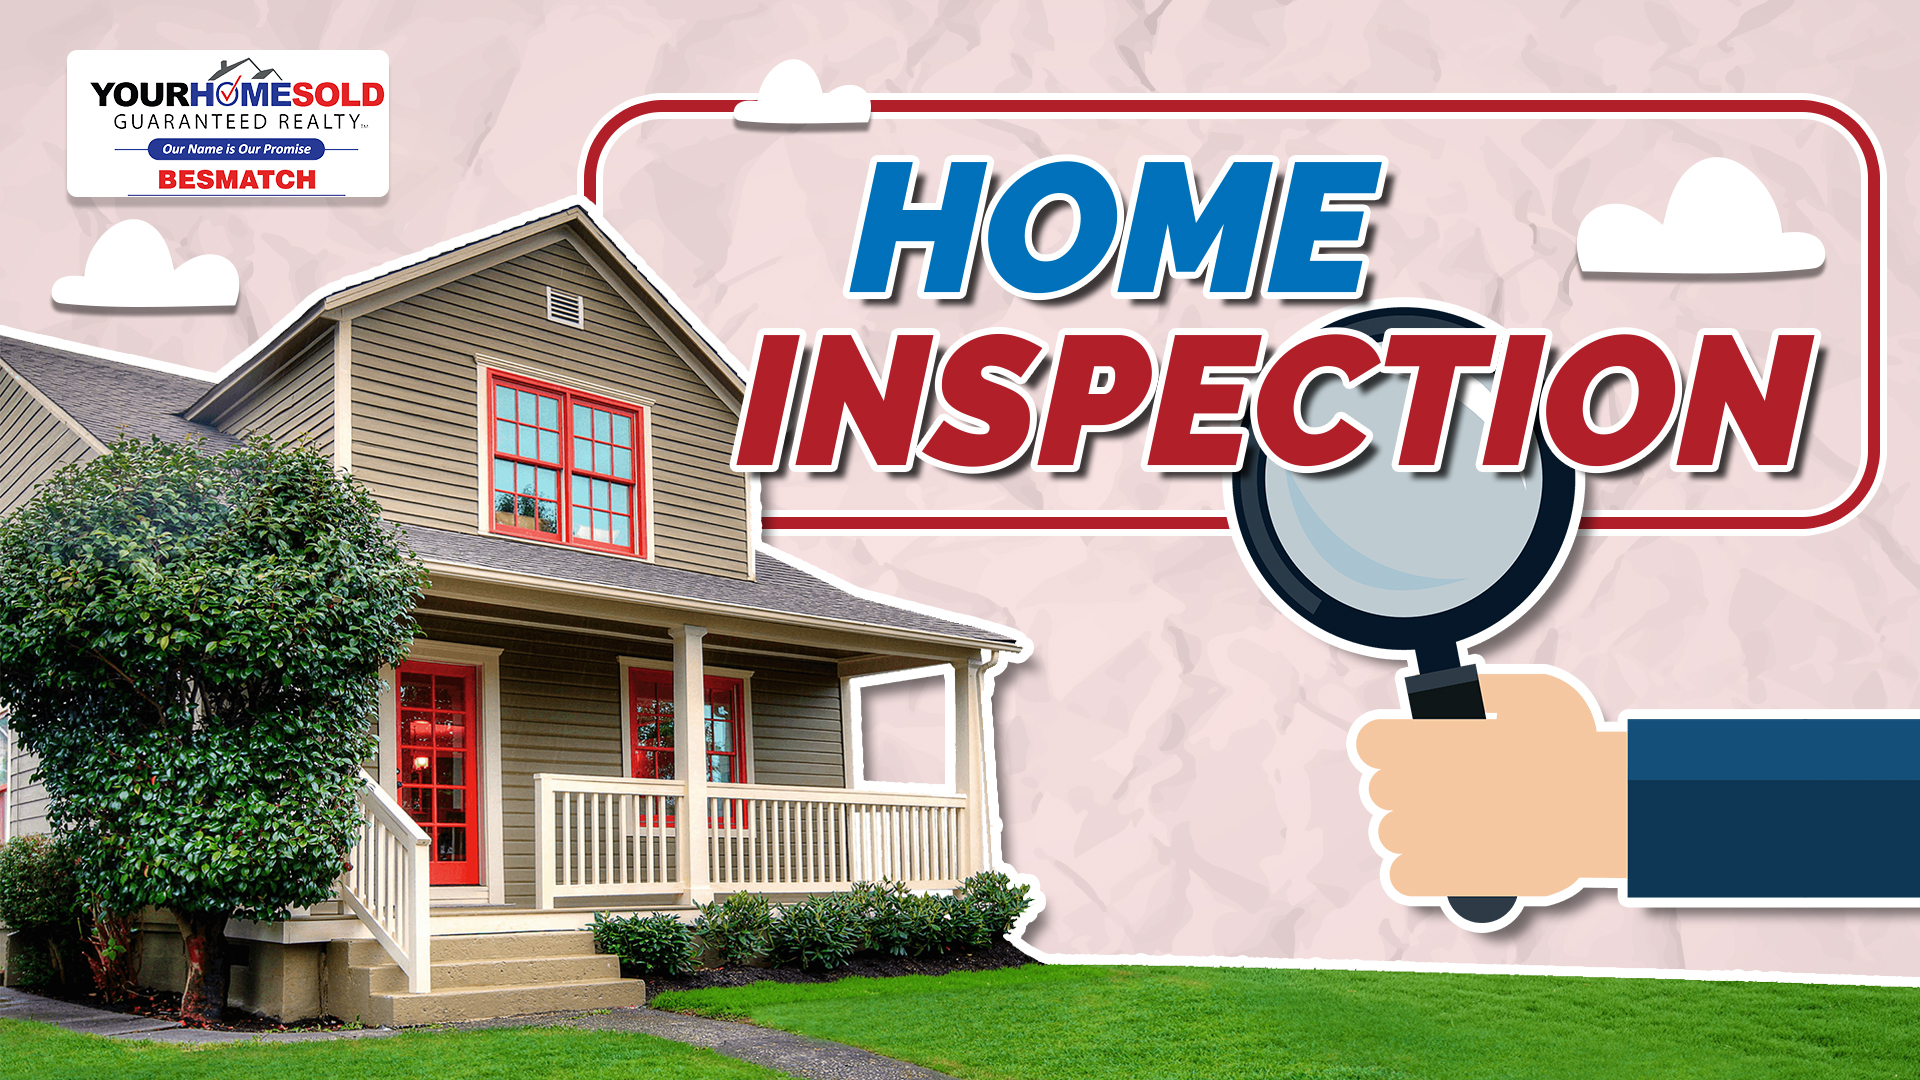 11 High Cost Inspection Traps You Should Know About Weeks Before Listing Your Home For Sale